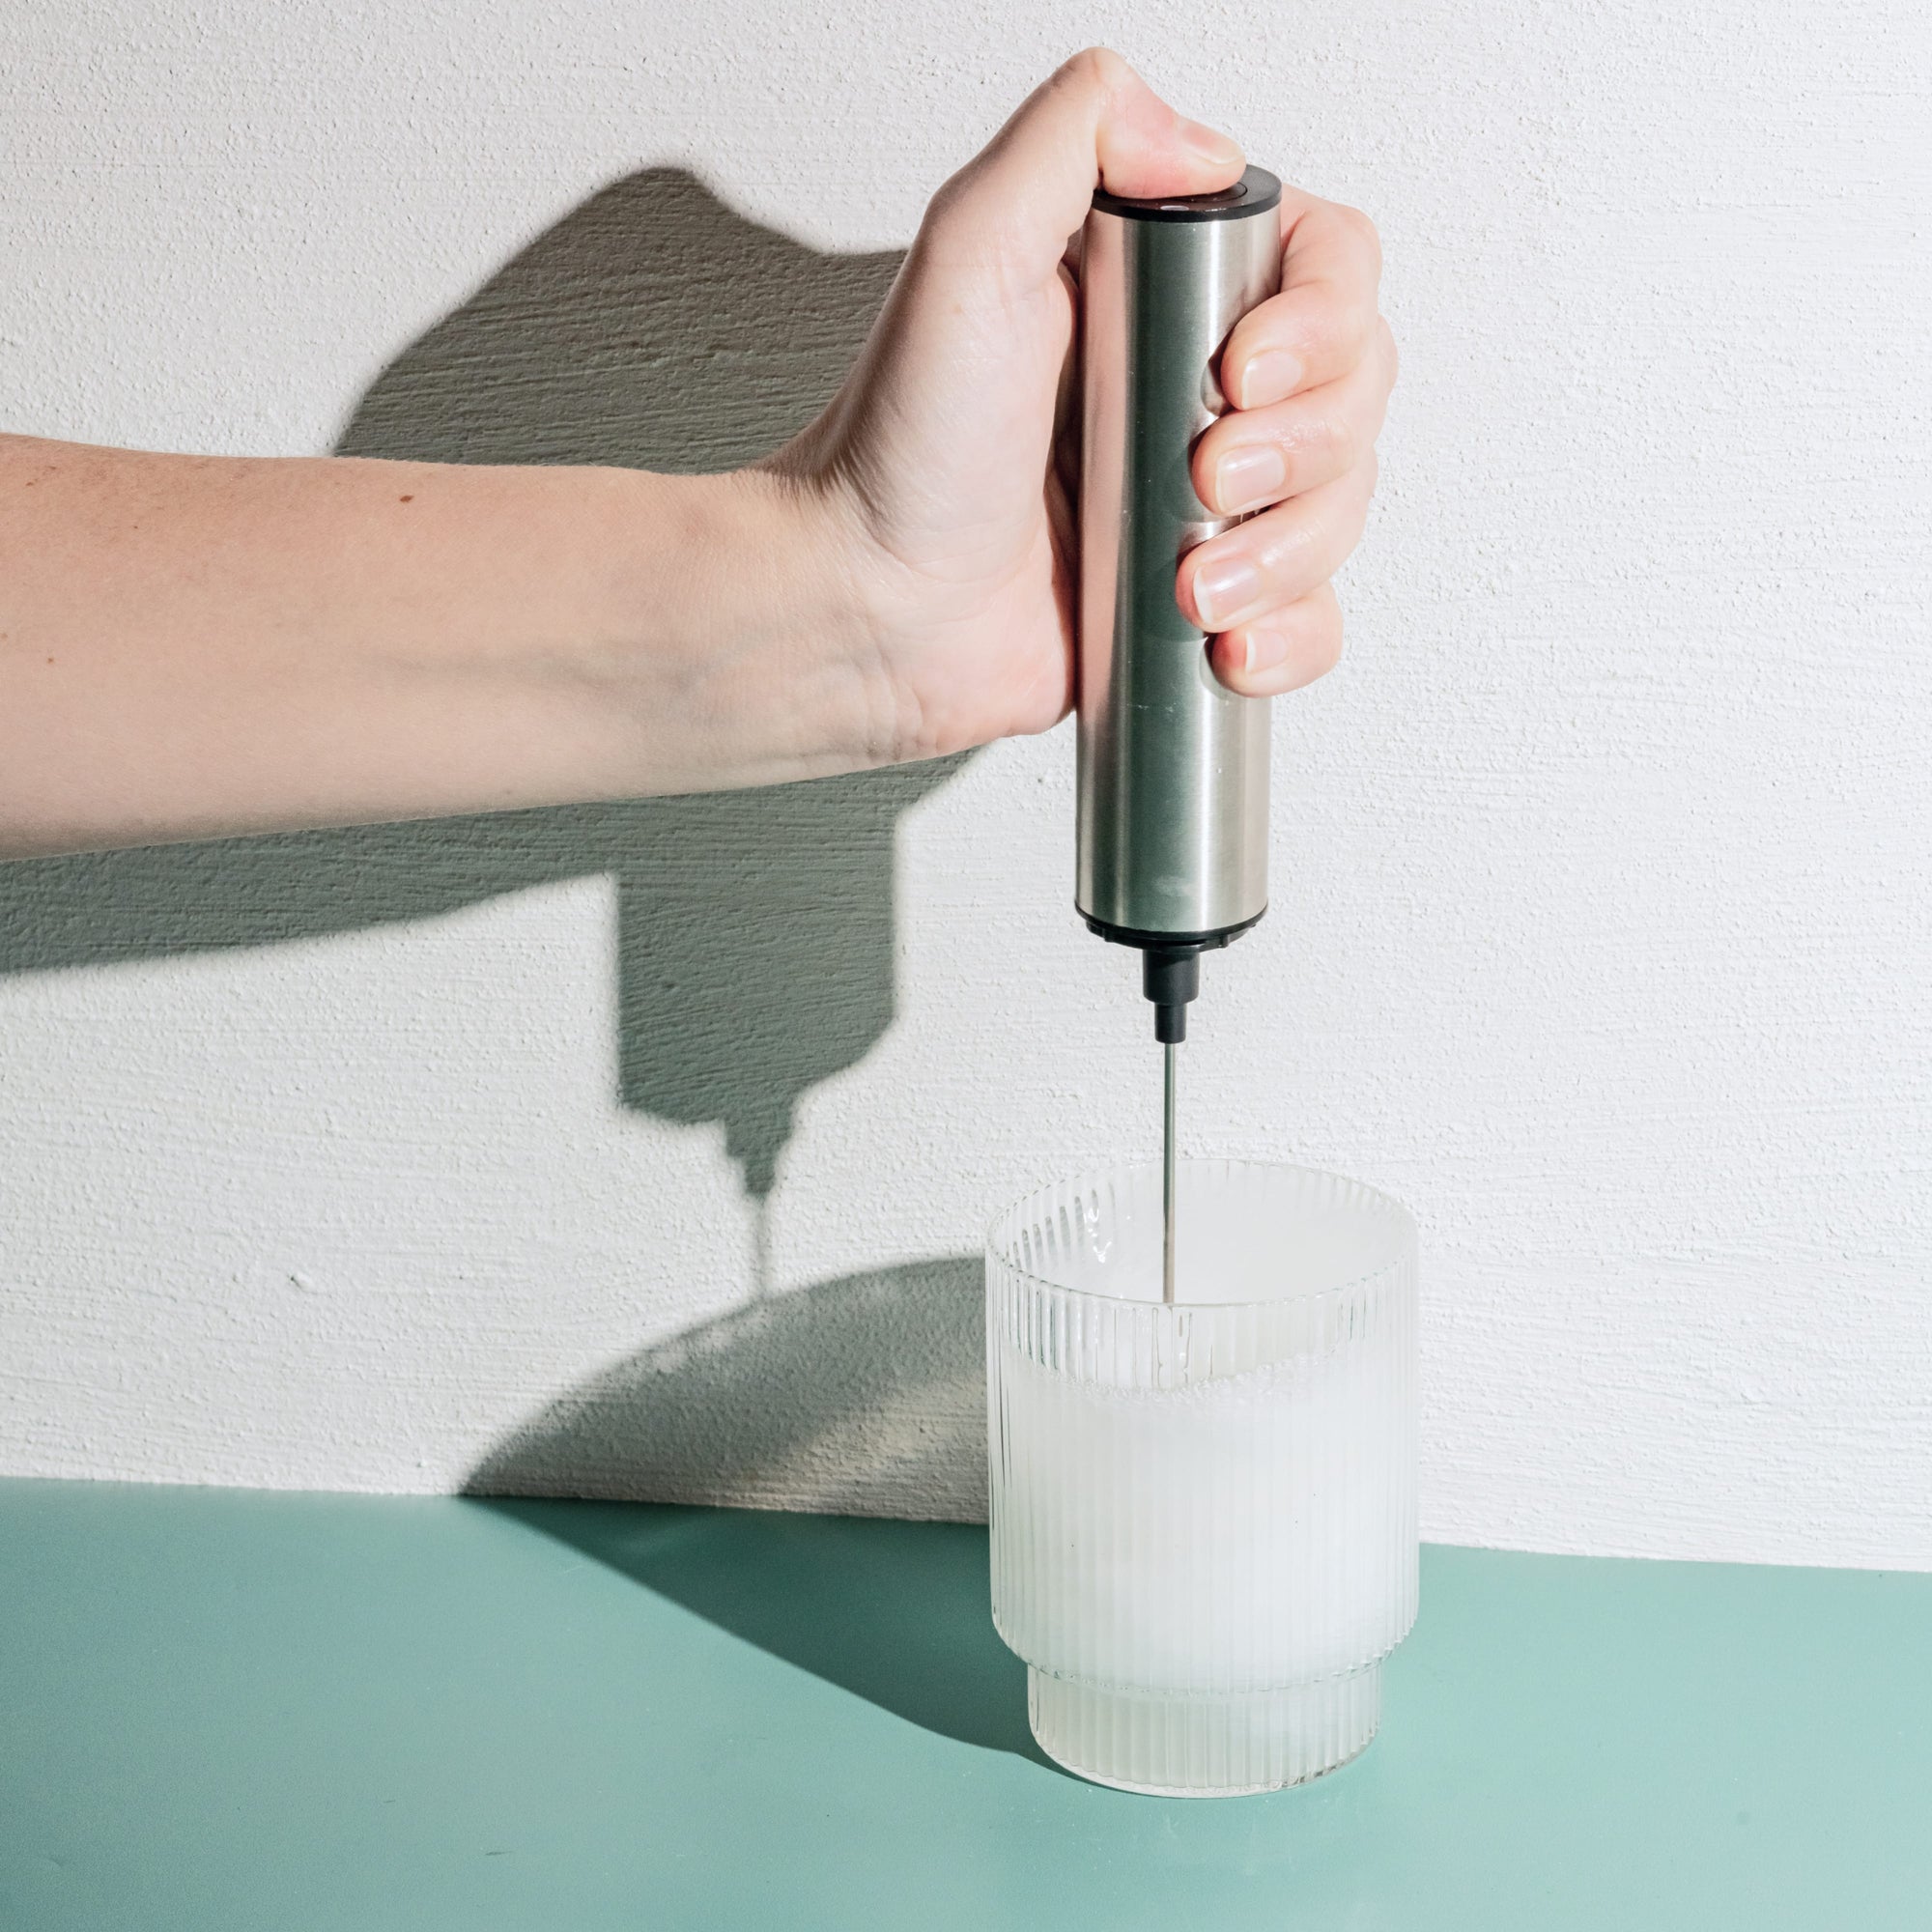 A Person using a Stainless Steel Whirl stirring Colostrum in a glass on a green table top